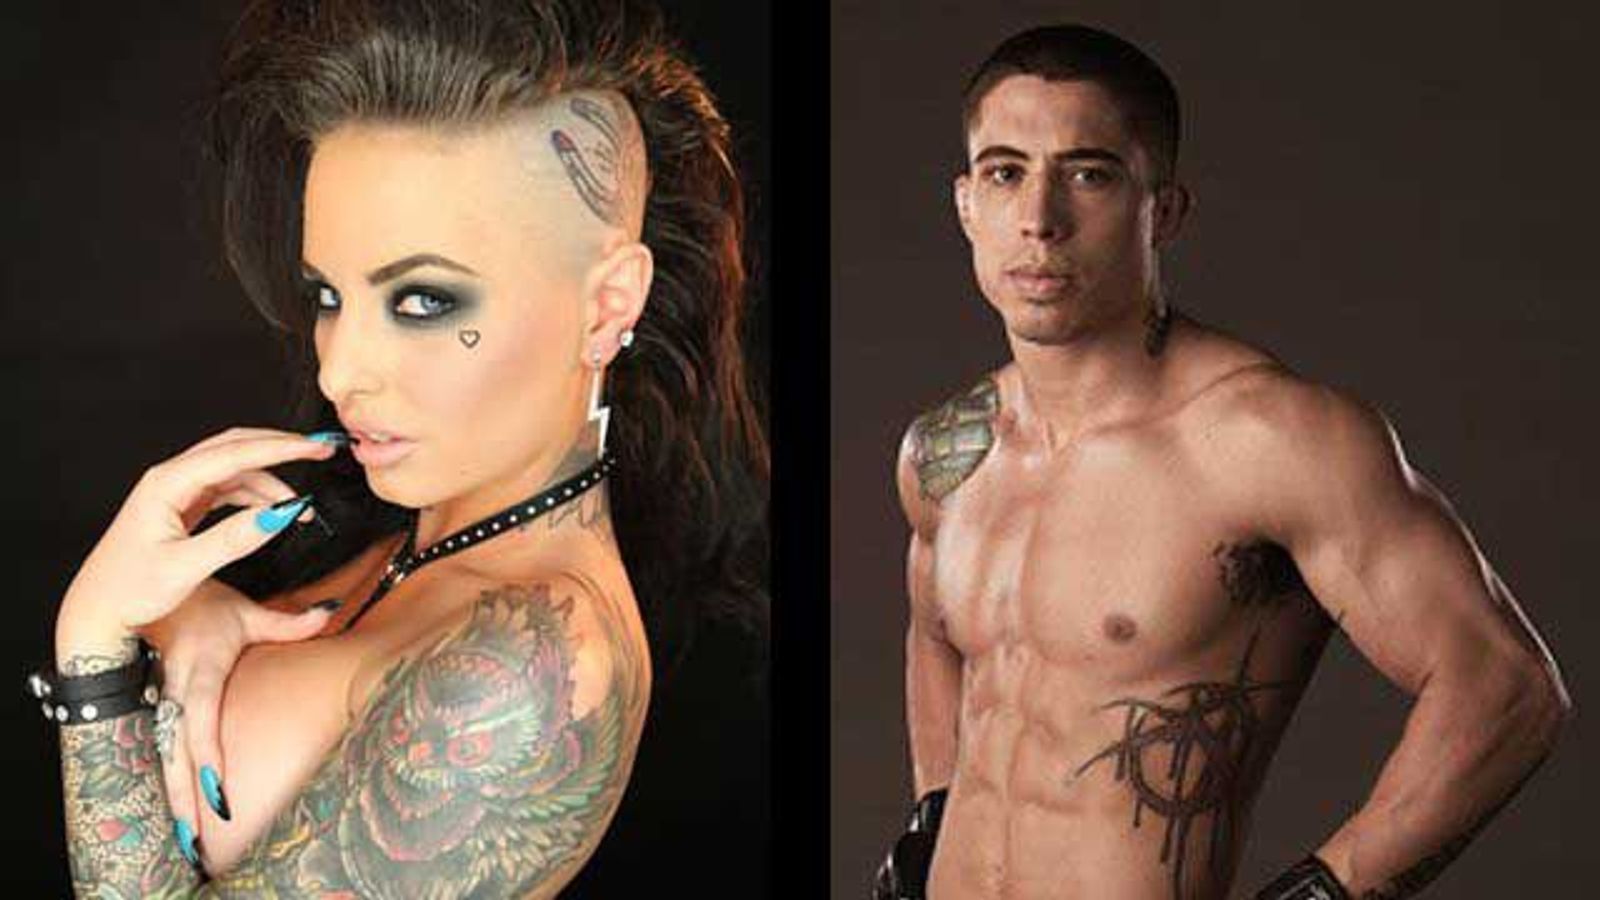 Christy Mack Releases Statement and Photos from Hospital Bed